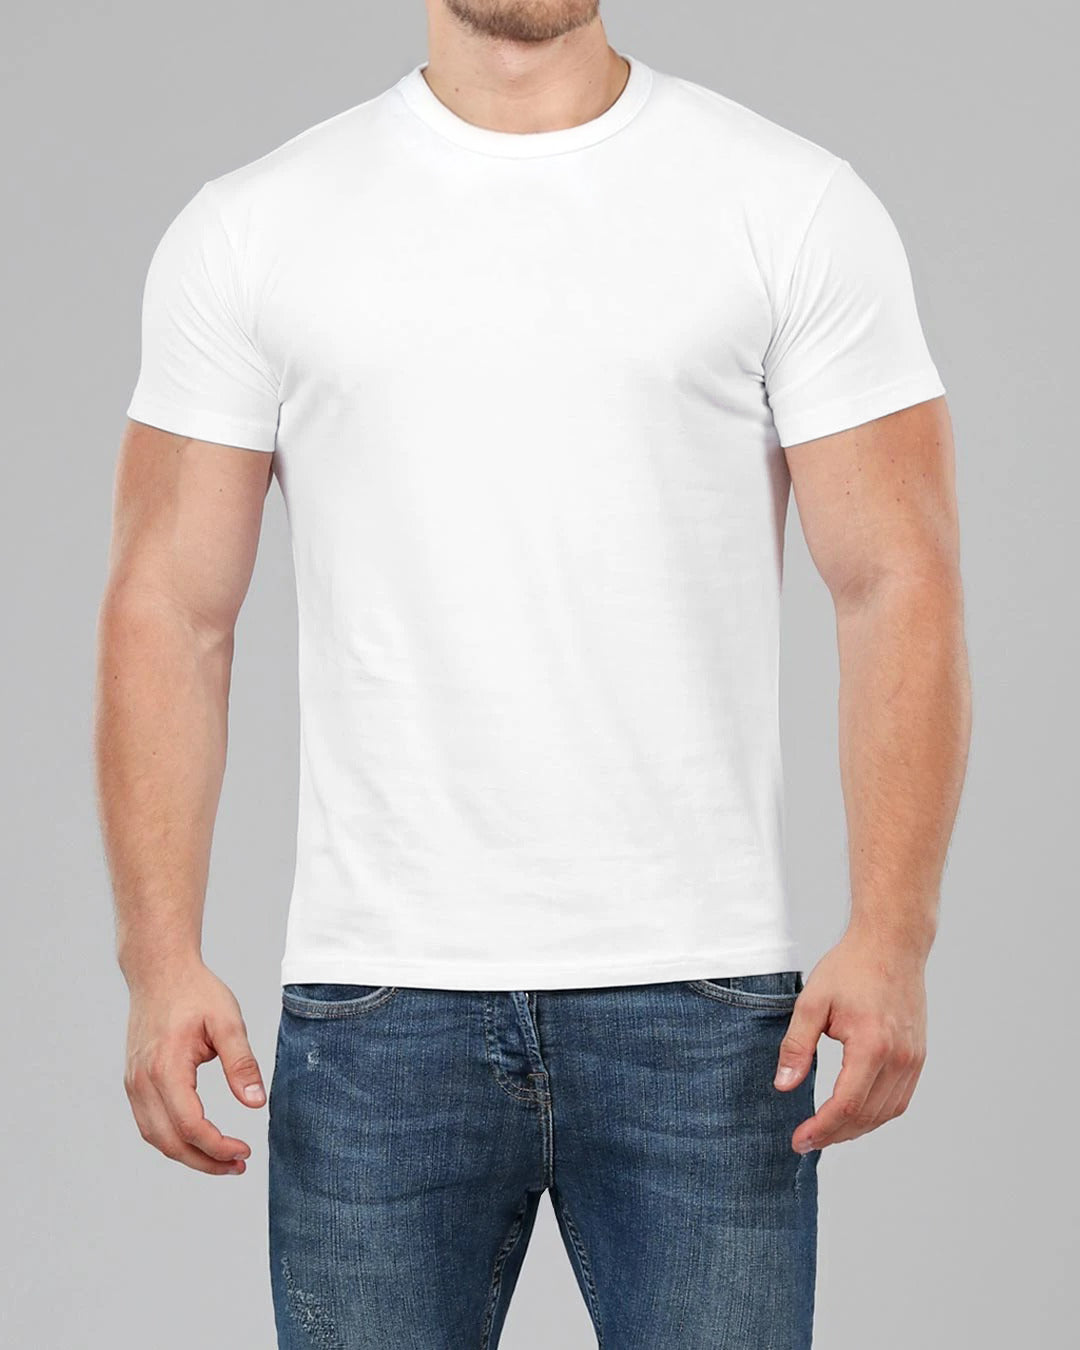 Crew Neck Fitted Plain T-Shirt | Muscle Fit Basics